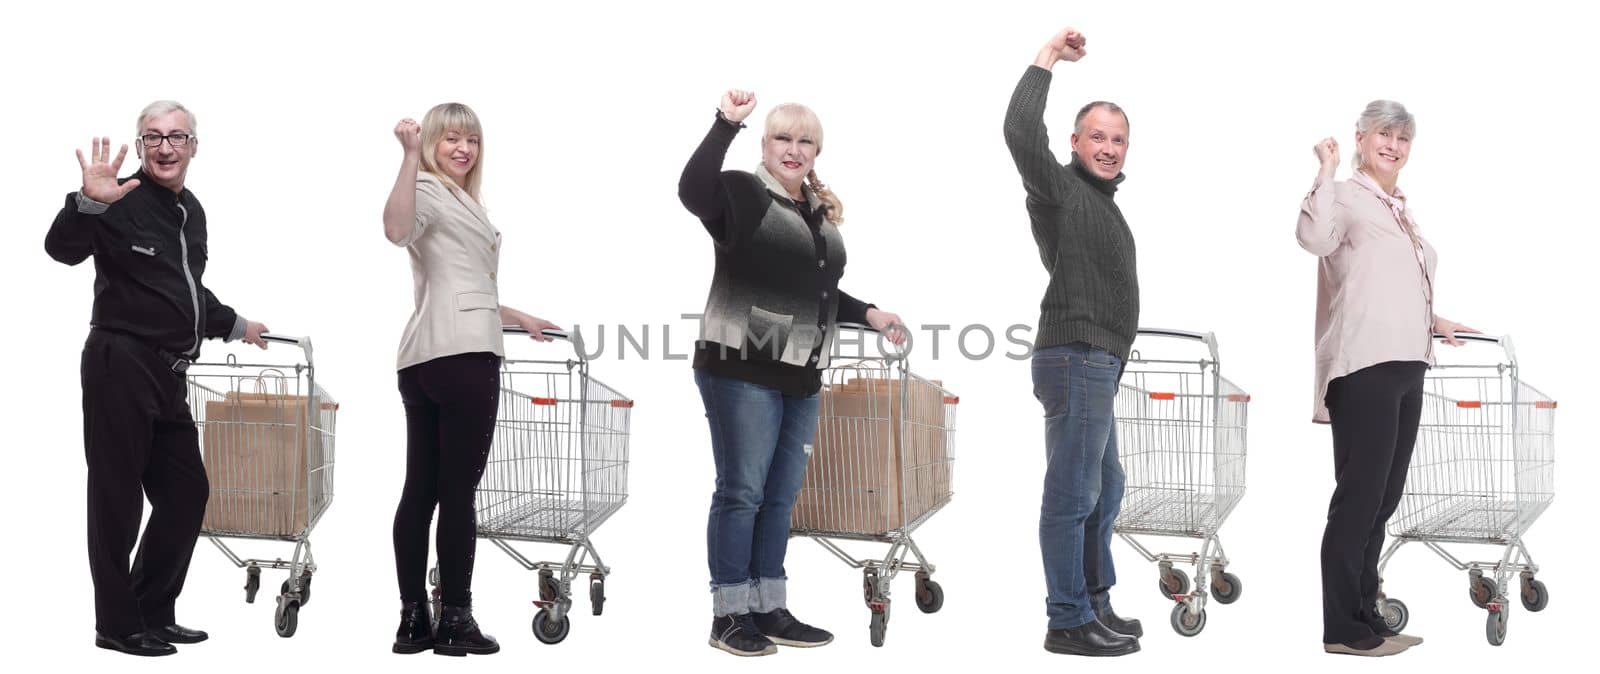 group of people with trolley greet isolated on white by asdf